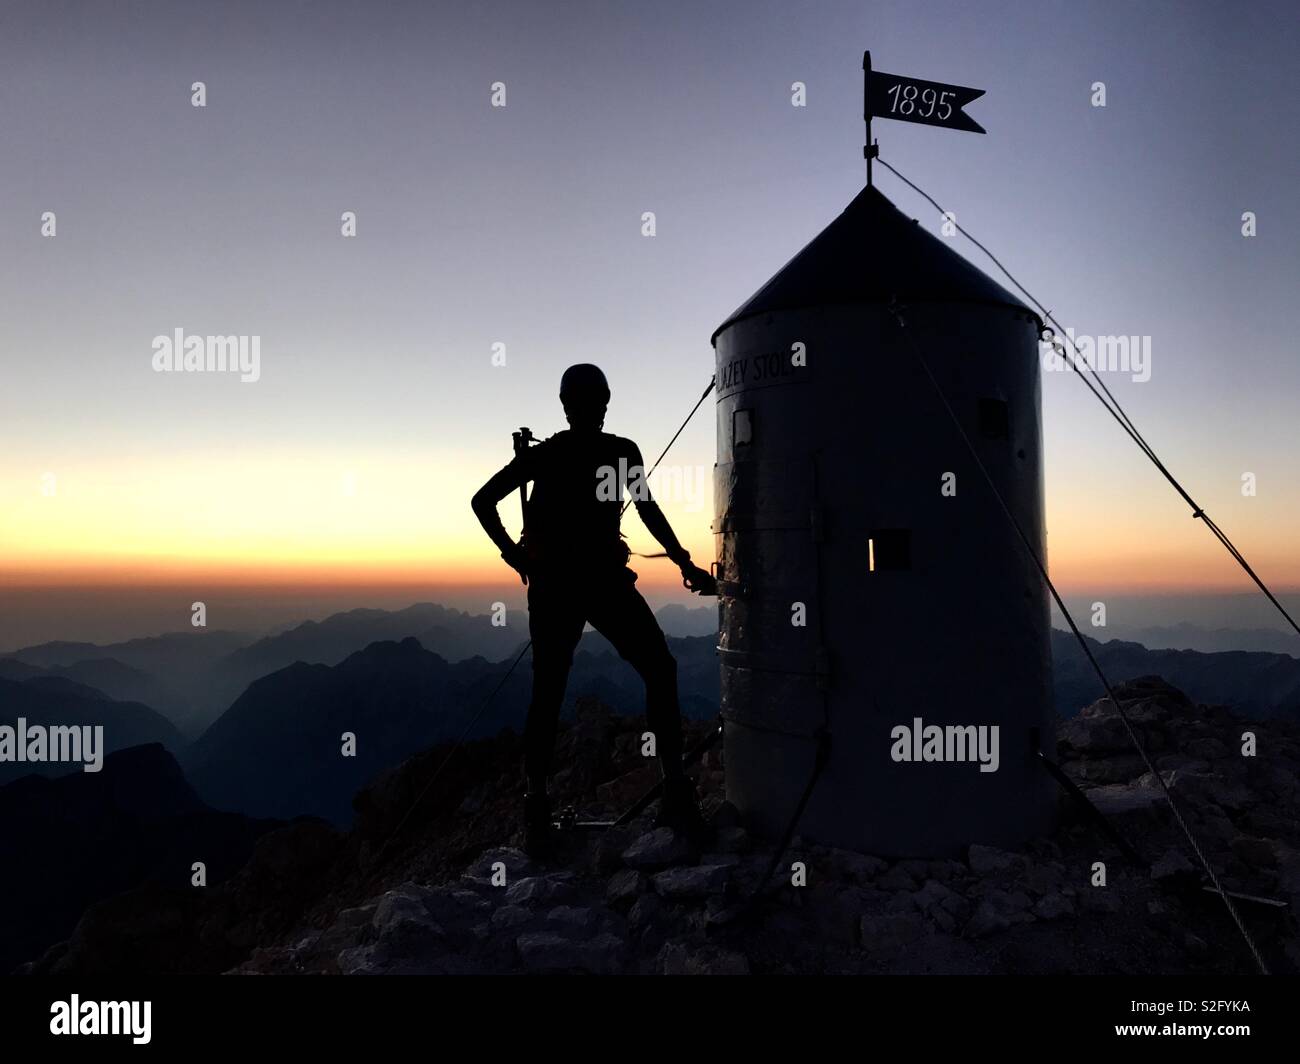 Sunset on Triglav mountain, which is the highest peak of Slovenia. Stock Photo